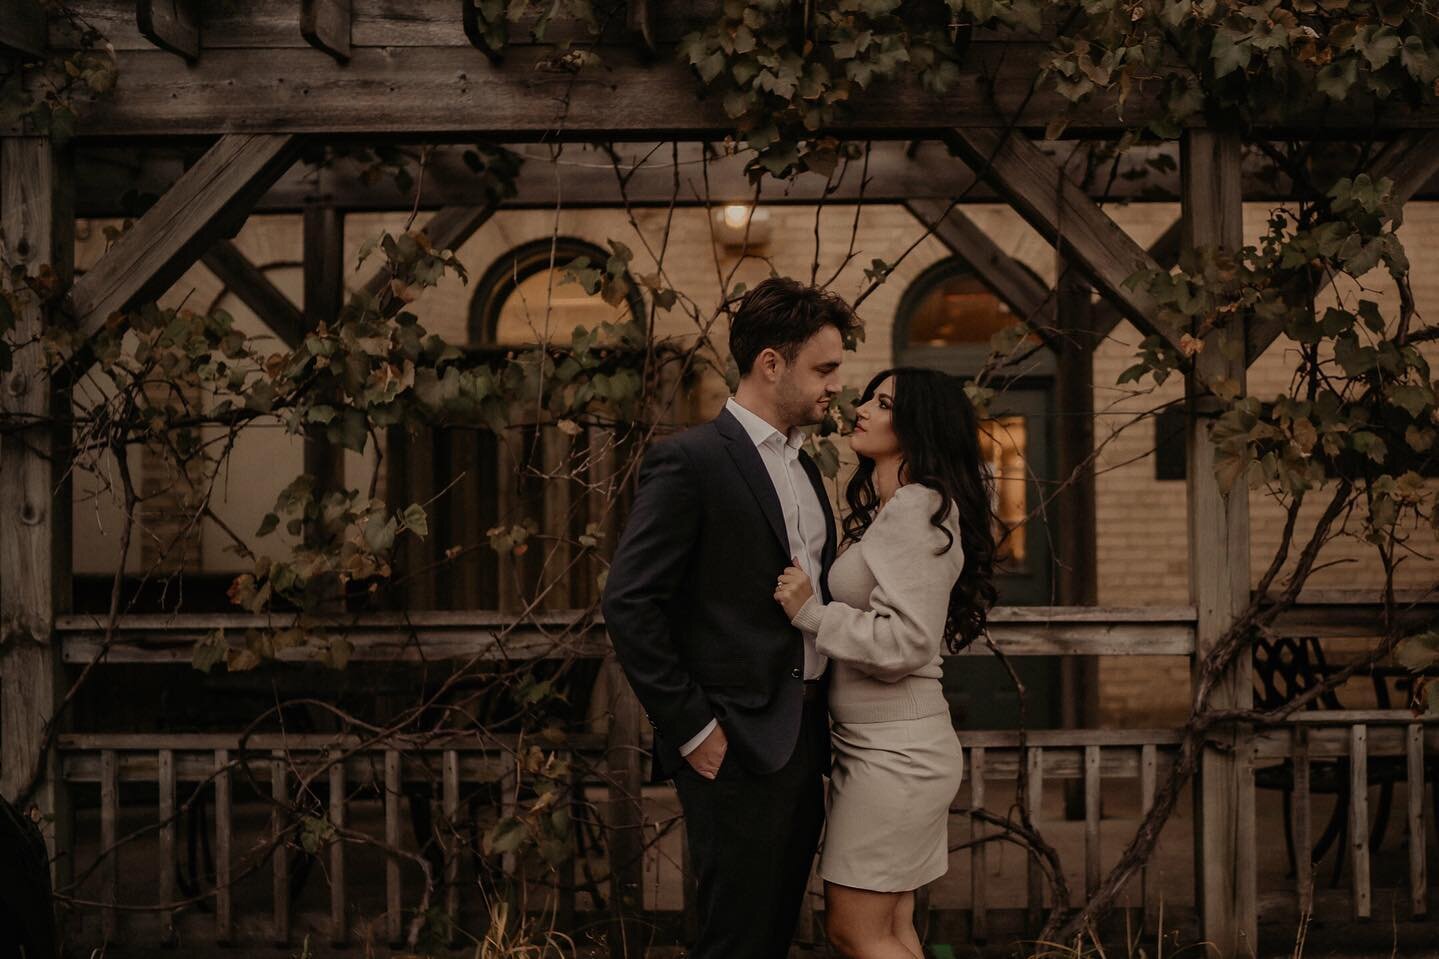 I dont have a yearly recap post this year, but I do have some adorable shots from this sweet engagement session back in the fall. Adriana &amp; Mike wanted European vibes for their session, and I made that happen 😏 here&rsquo;s some of my favourite 